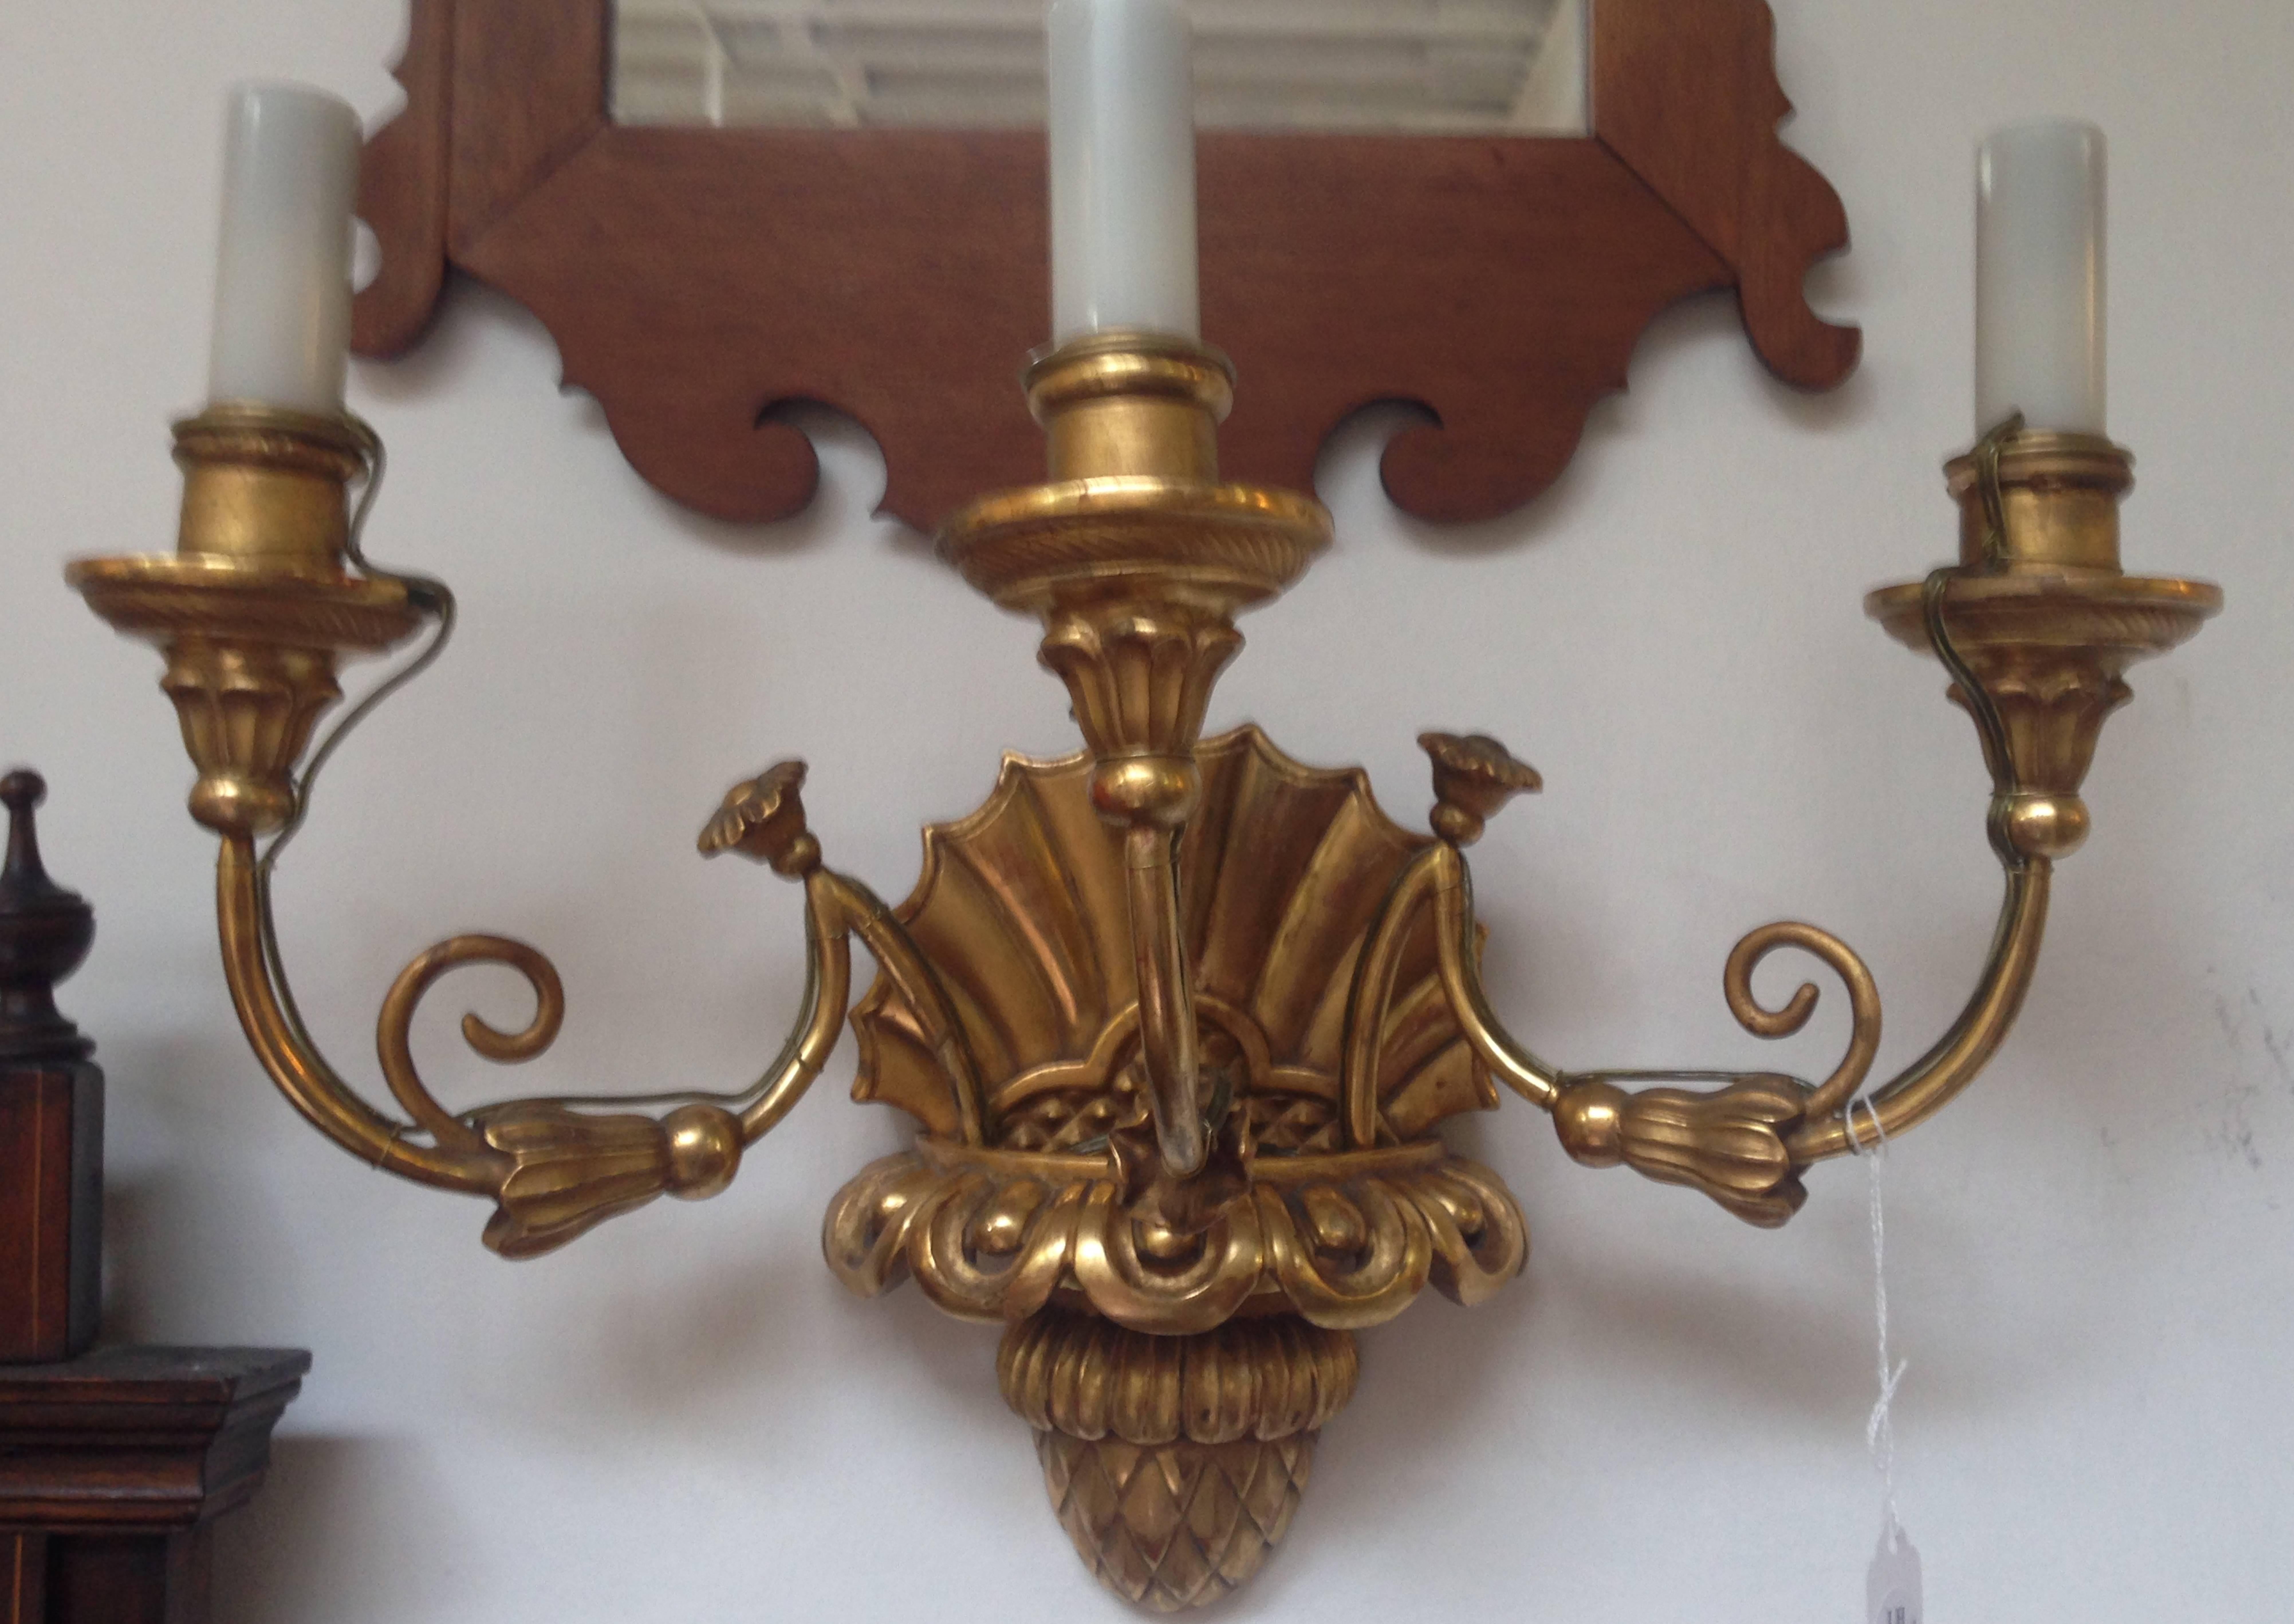 A pair of Biedermeier giltwood three-light sconces. Measures: Height 12 1/2 x width 17 inches.